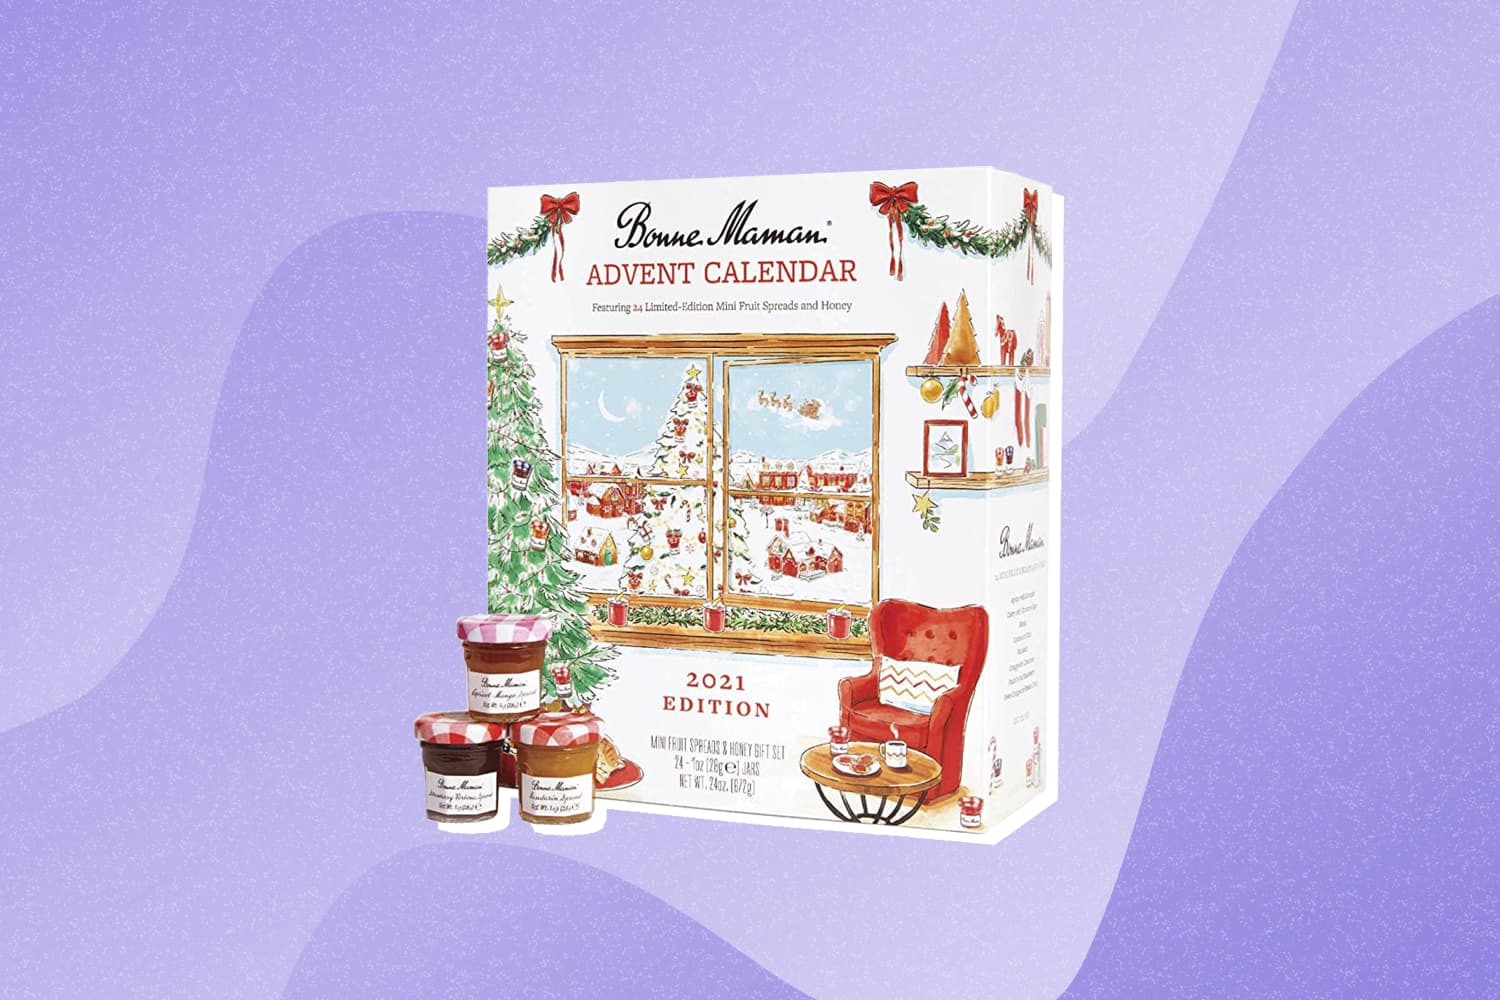 Bonne Maman #39 s 2021 Advent Calendar Is Available to Buy on Amazon